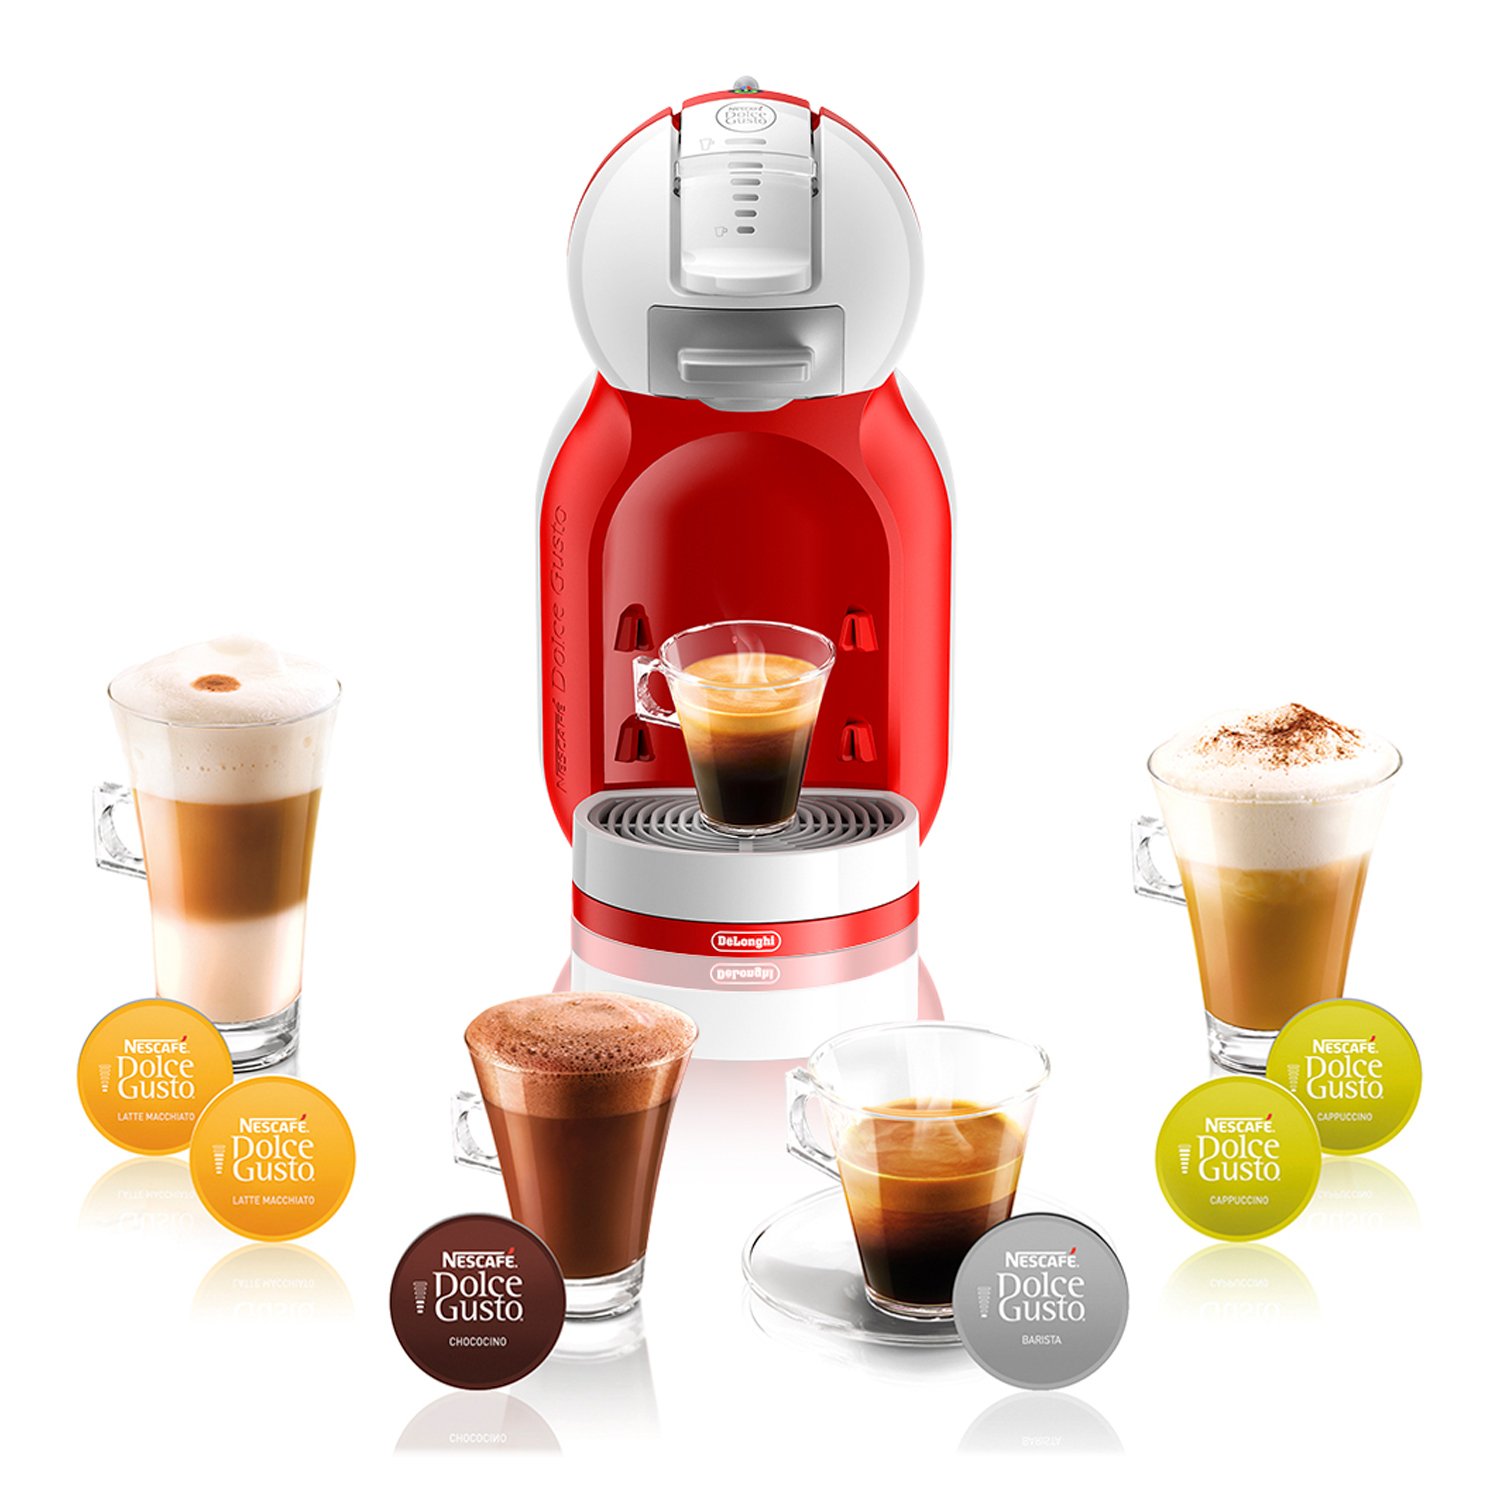 Dolce gusto дешево. Капсулы Дольче густо. Кофе Дольче густо. Dolce gusto edg455tex1. Нескафе Дольче густо.